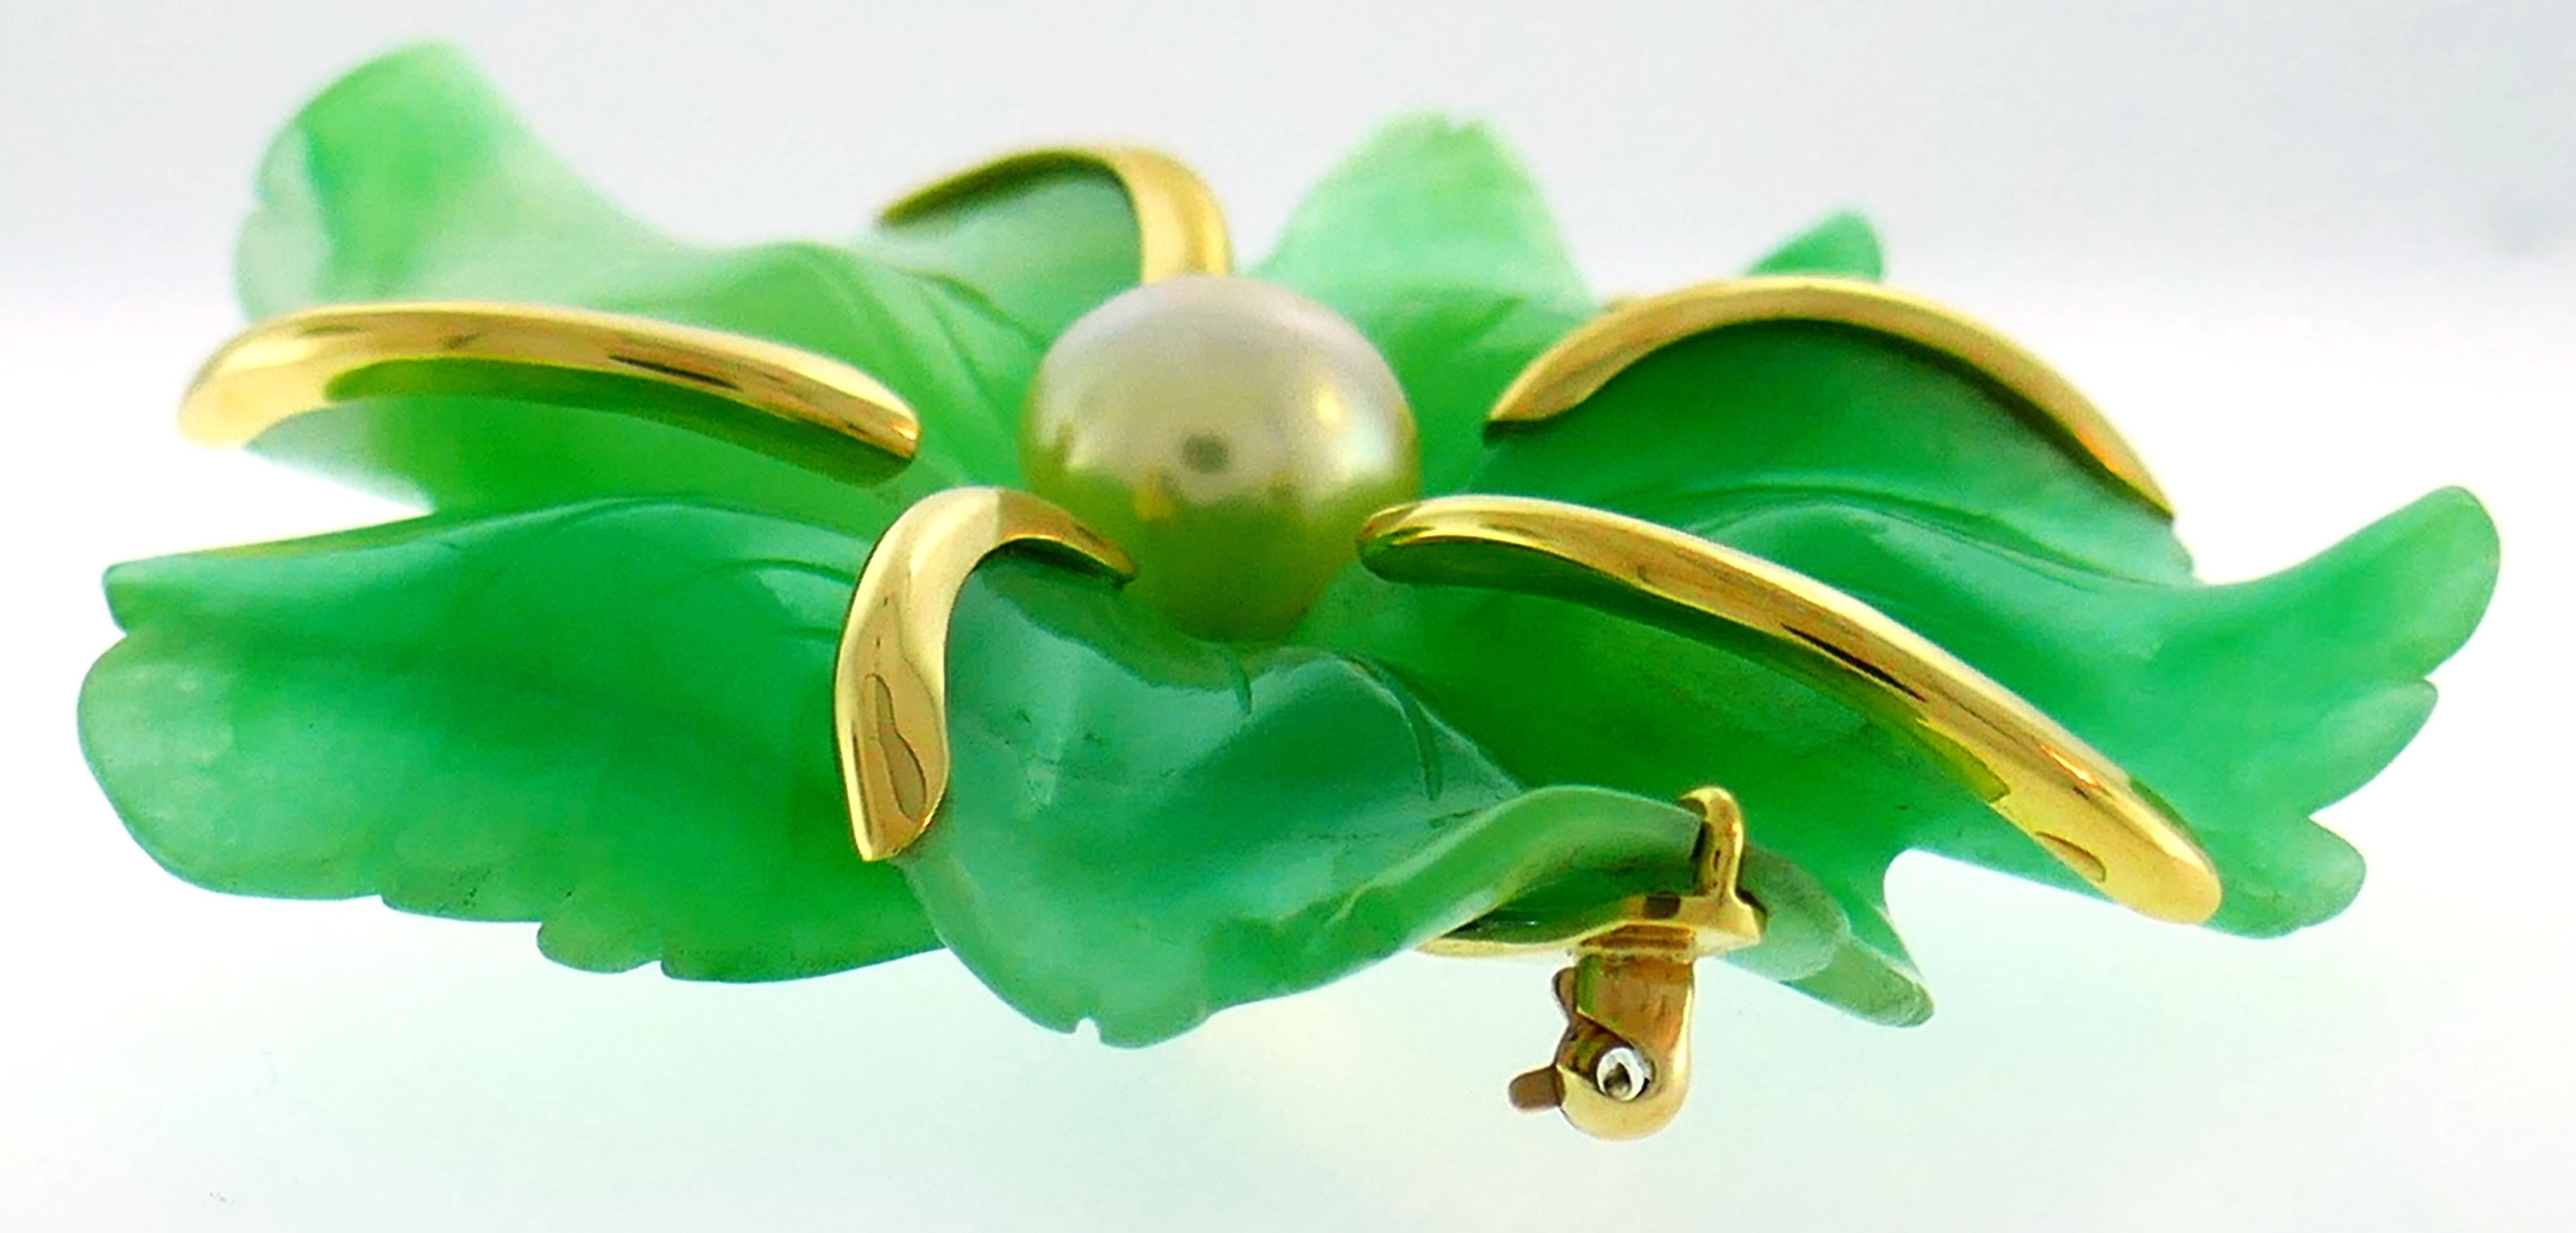 Bold and elegant pin created by Andrew Clunn in the 1980s. Colorful, chic and wearable, the clip is a great addition to your jewelry collection. 
Made of 18 karat (stamped) yellow gold and carved chrysoprase accented with a South Sea golden